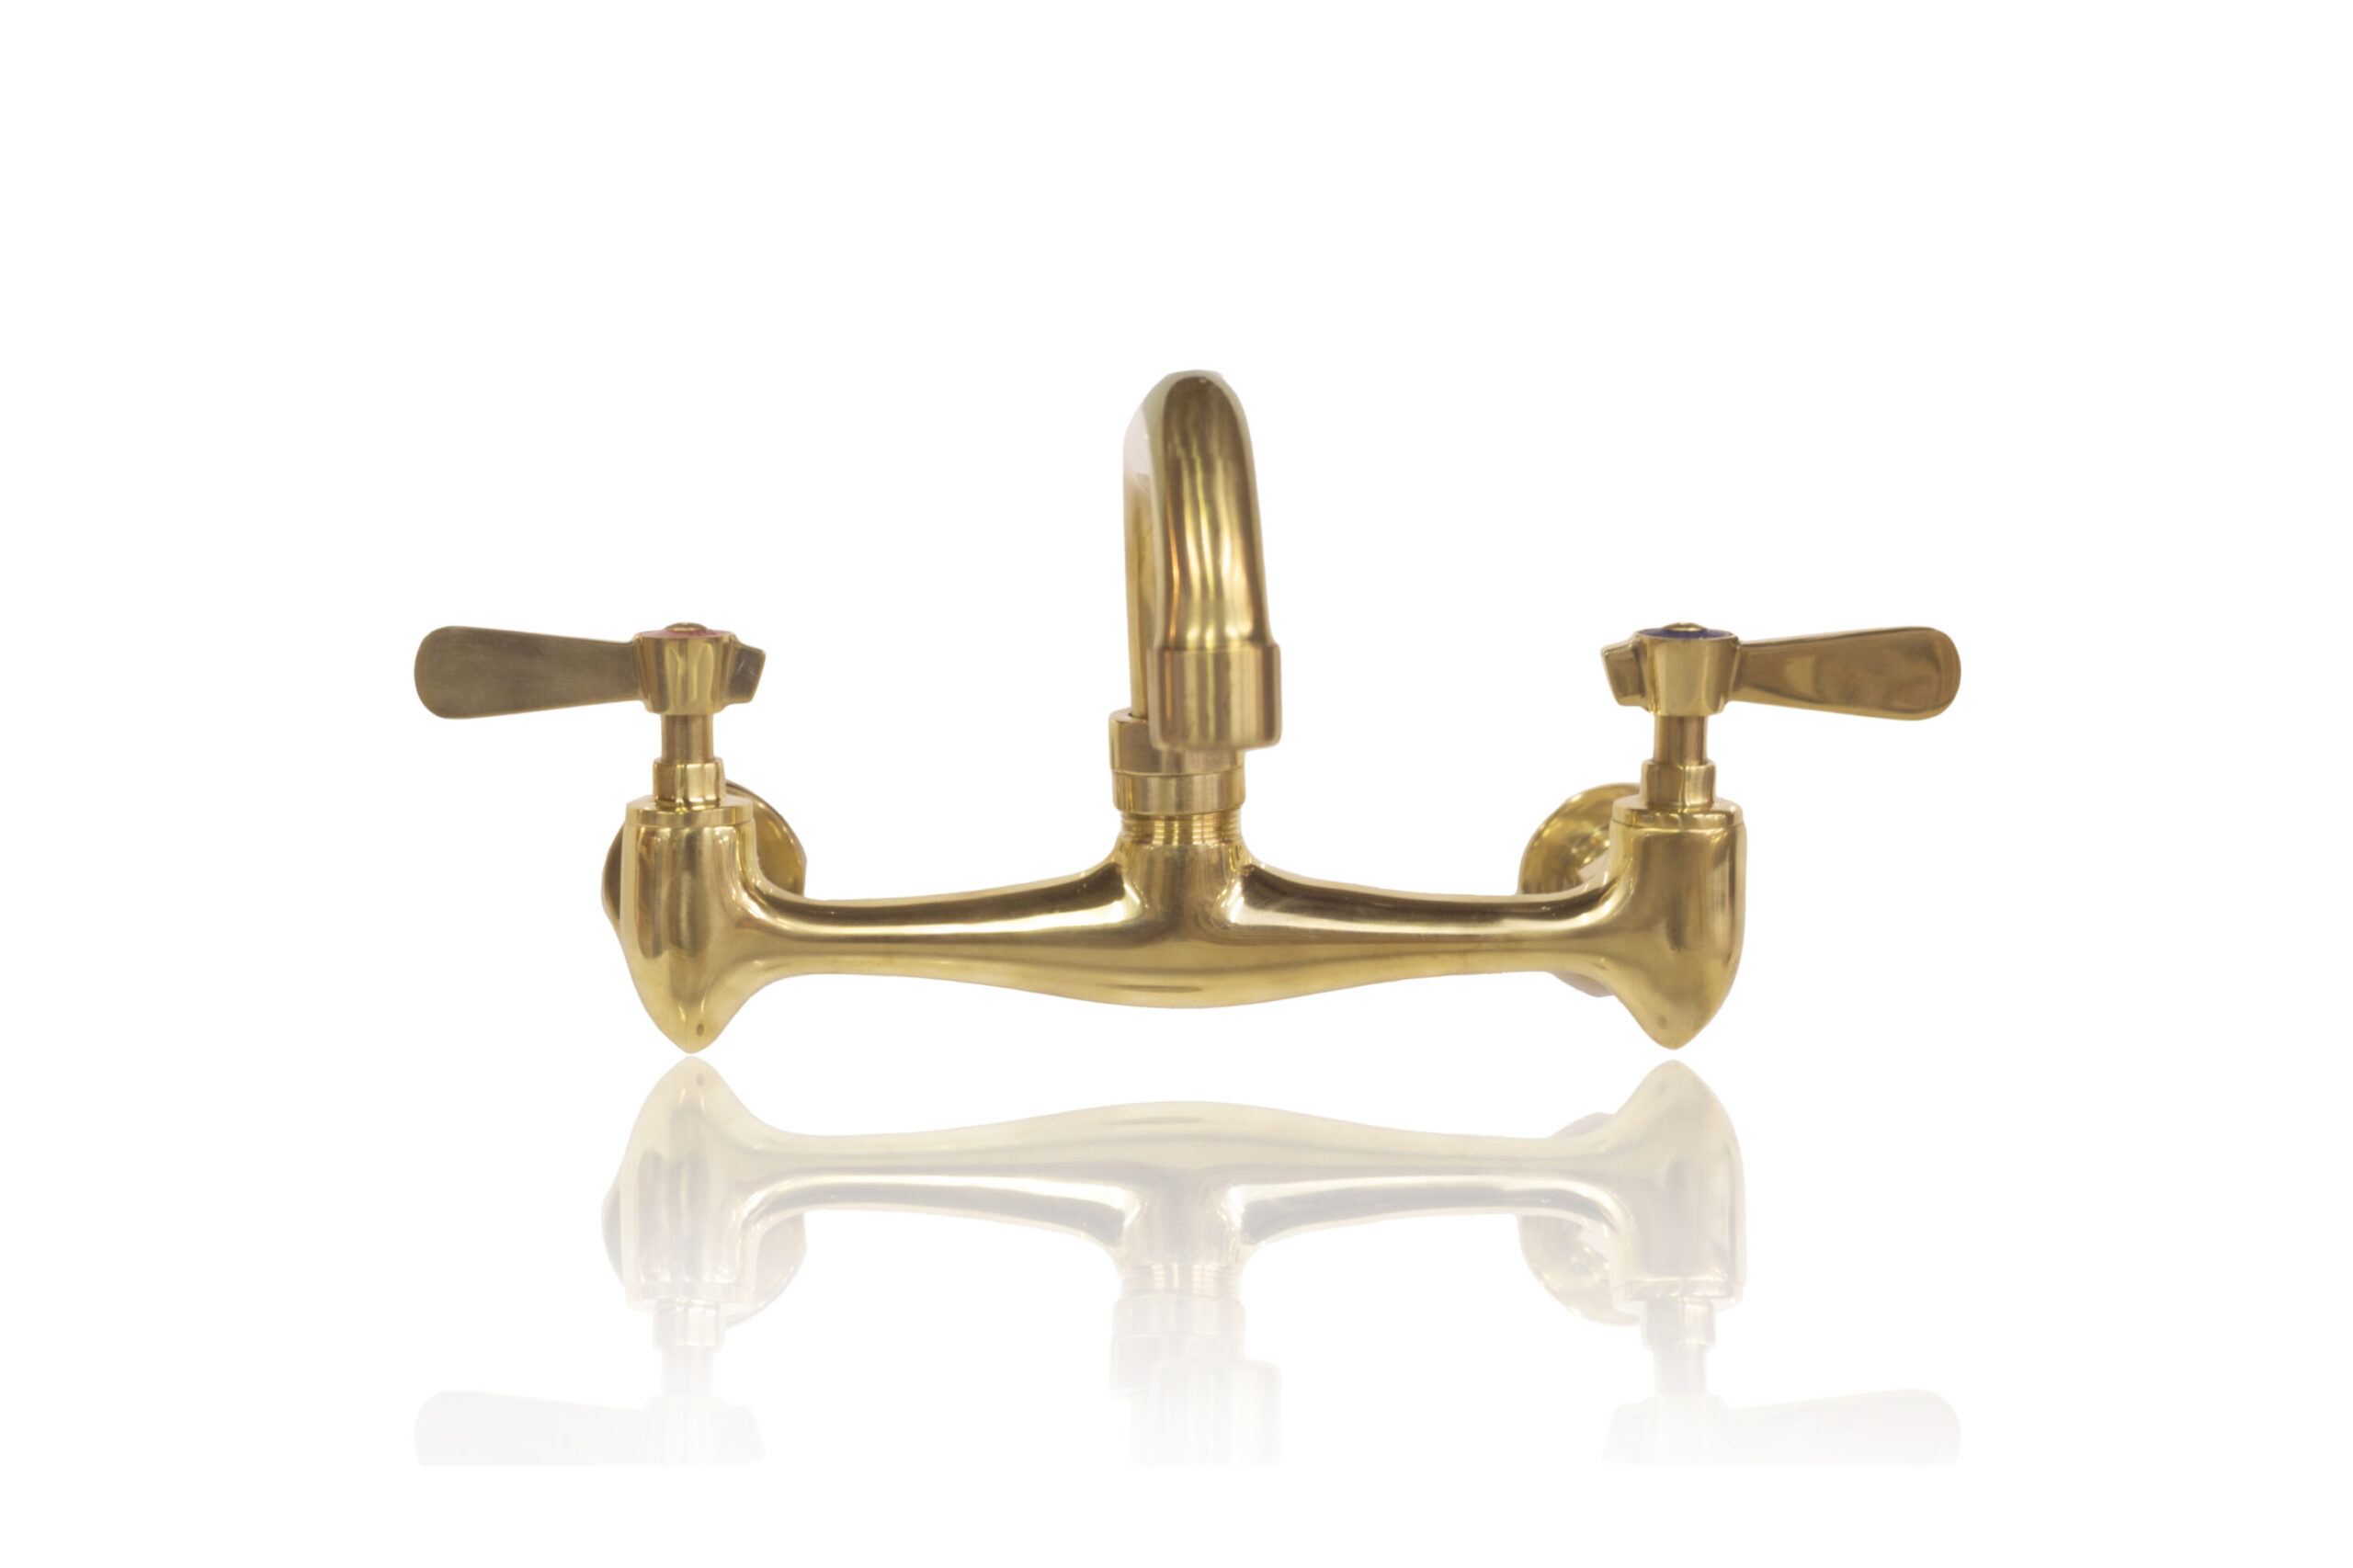 Natural Unlacquered Brass 19-RE-FC-UB-LH 8 inch Center Commercial Style  Faucet w/ Lever Handles - WatermarkFixtures